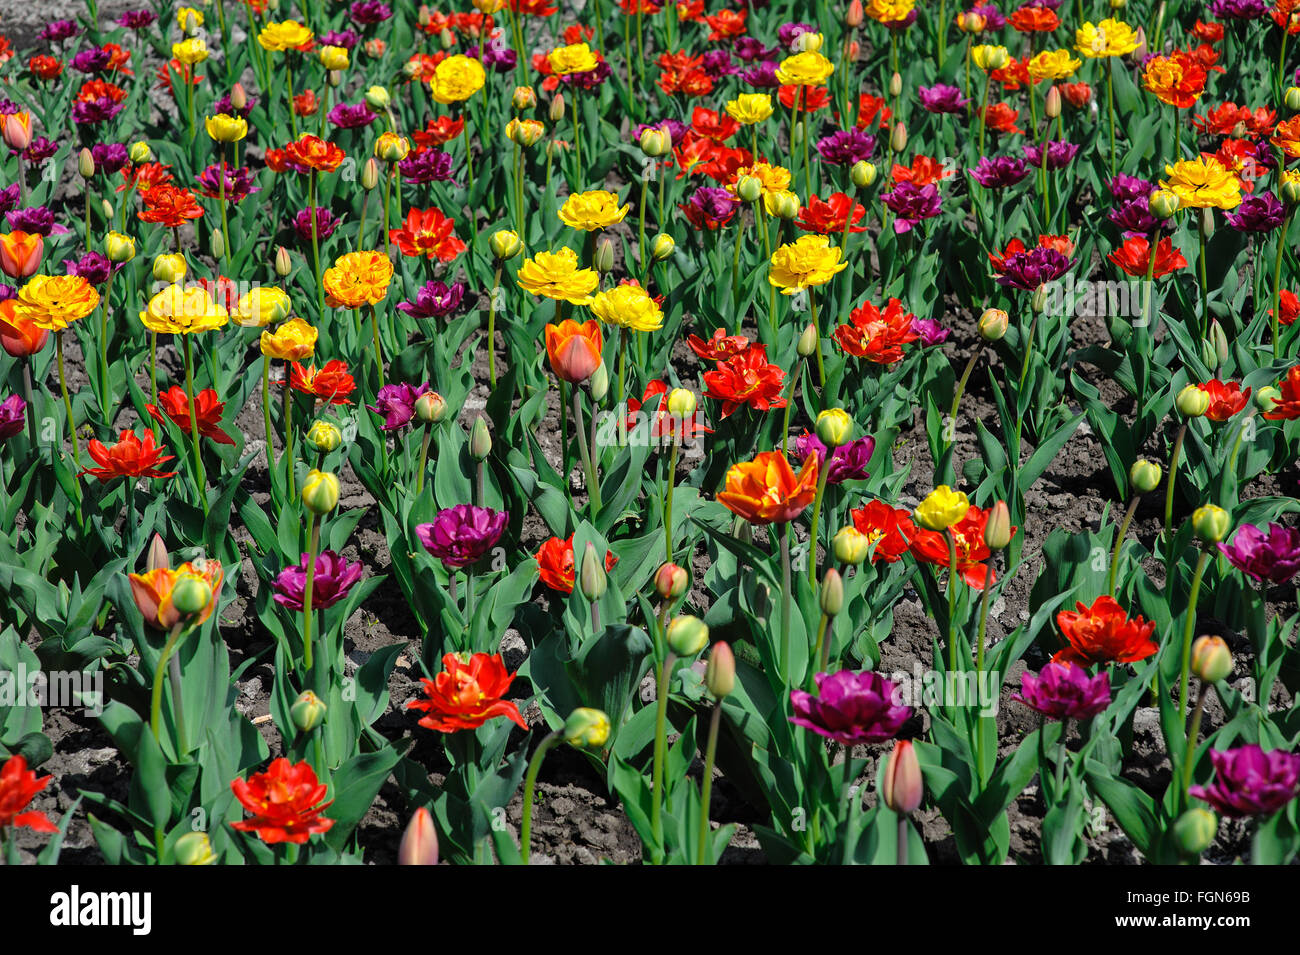 Multicolored tulips and pansy flowers on flowerbed Stock Photo